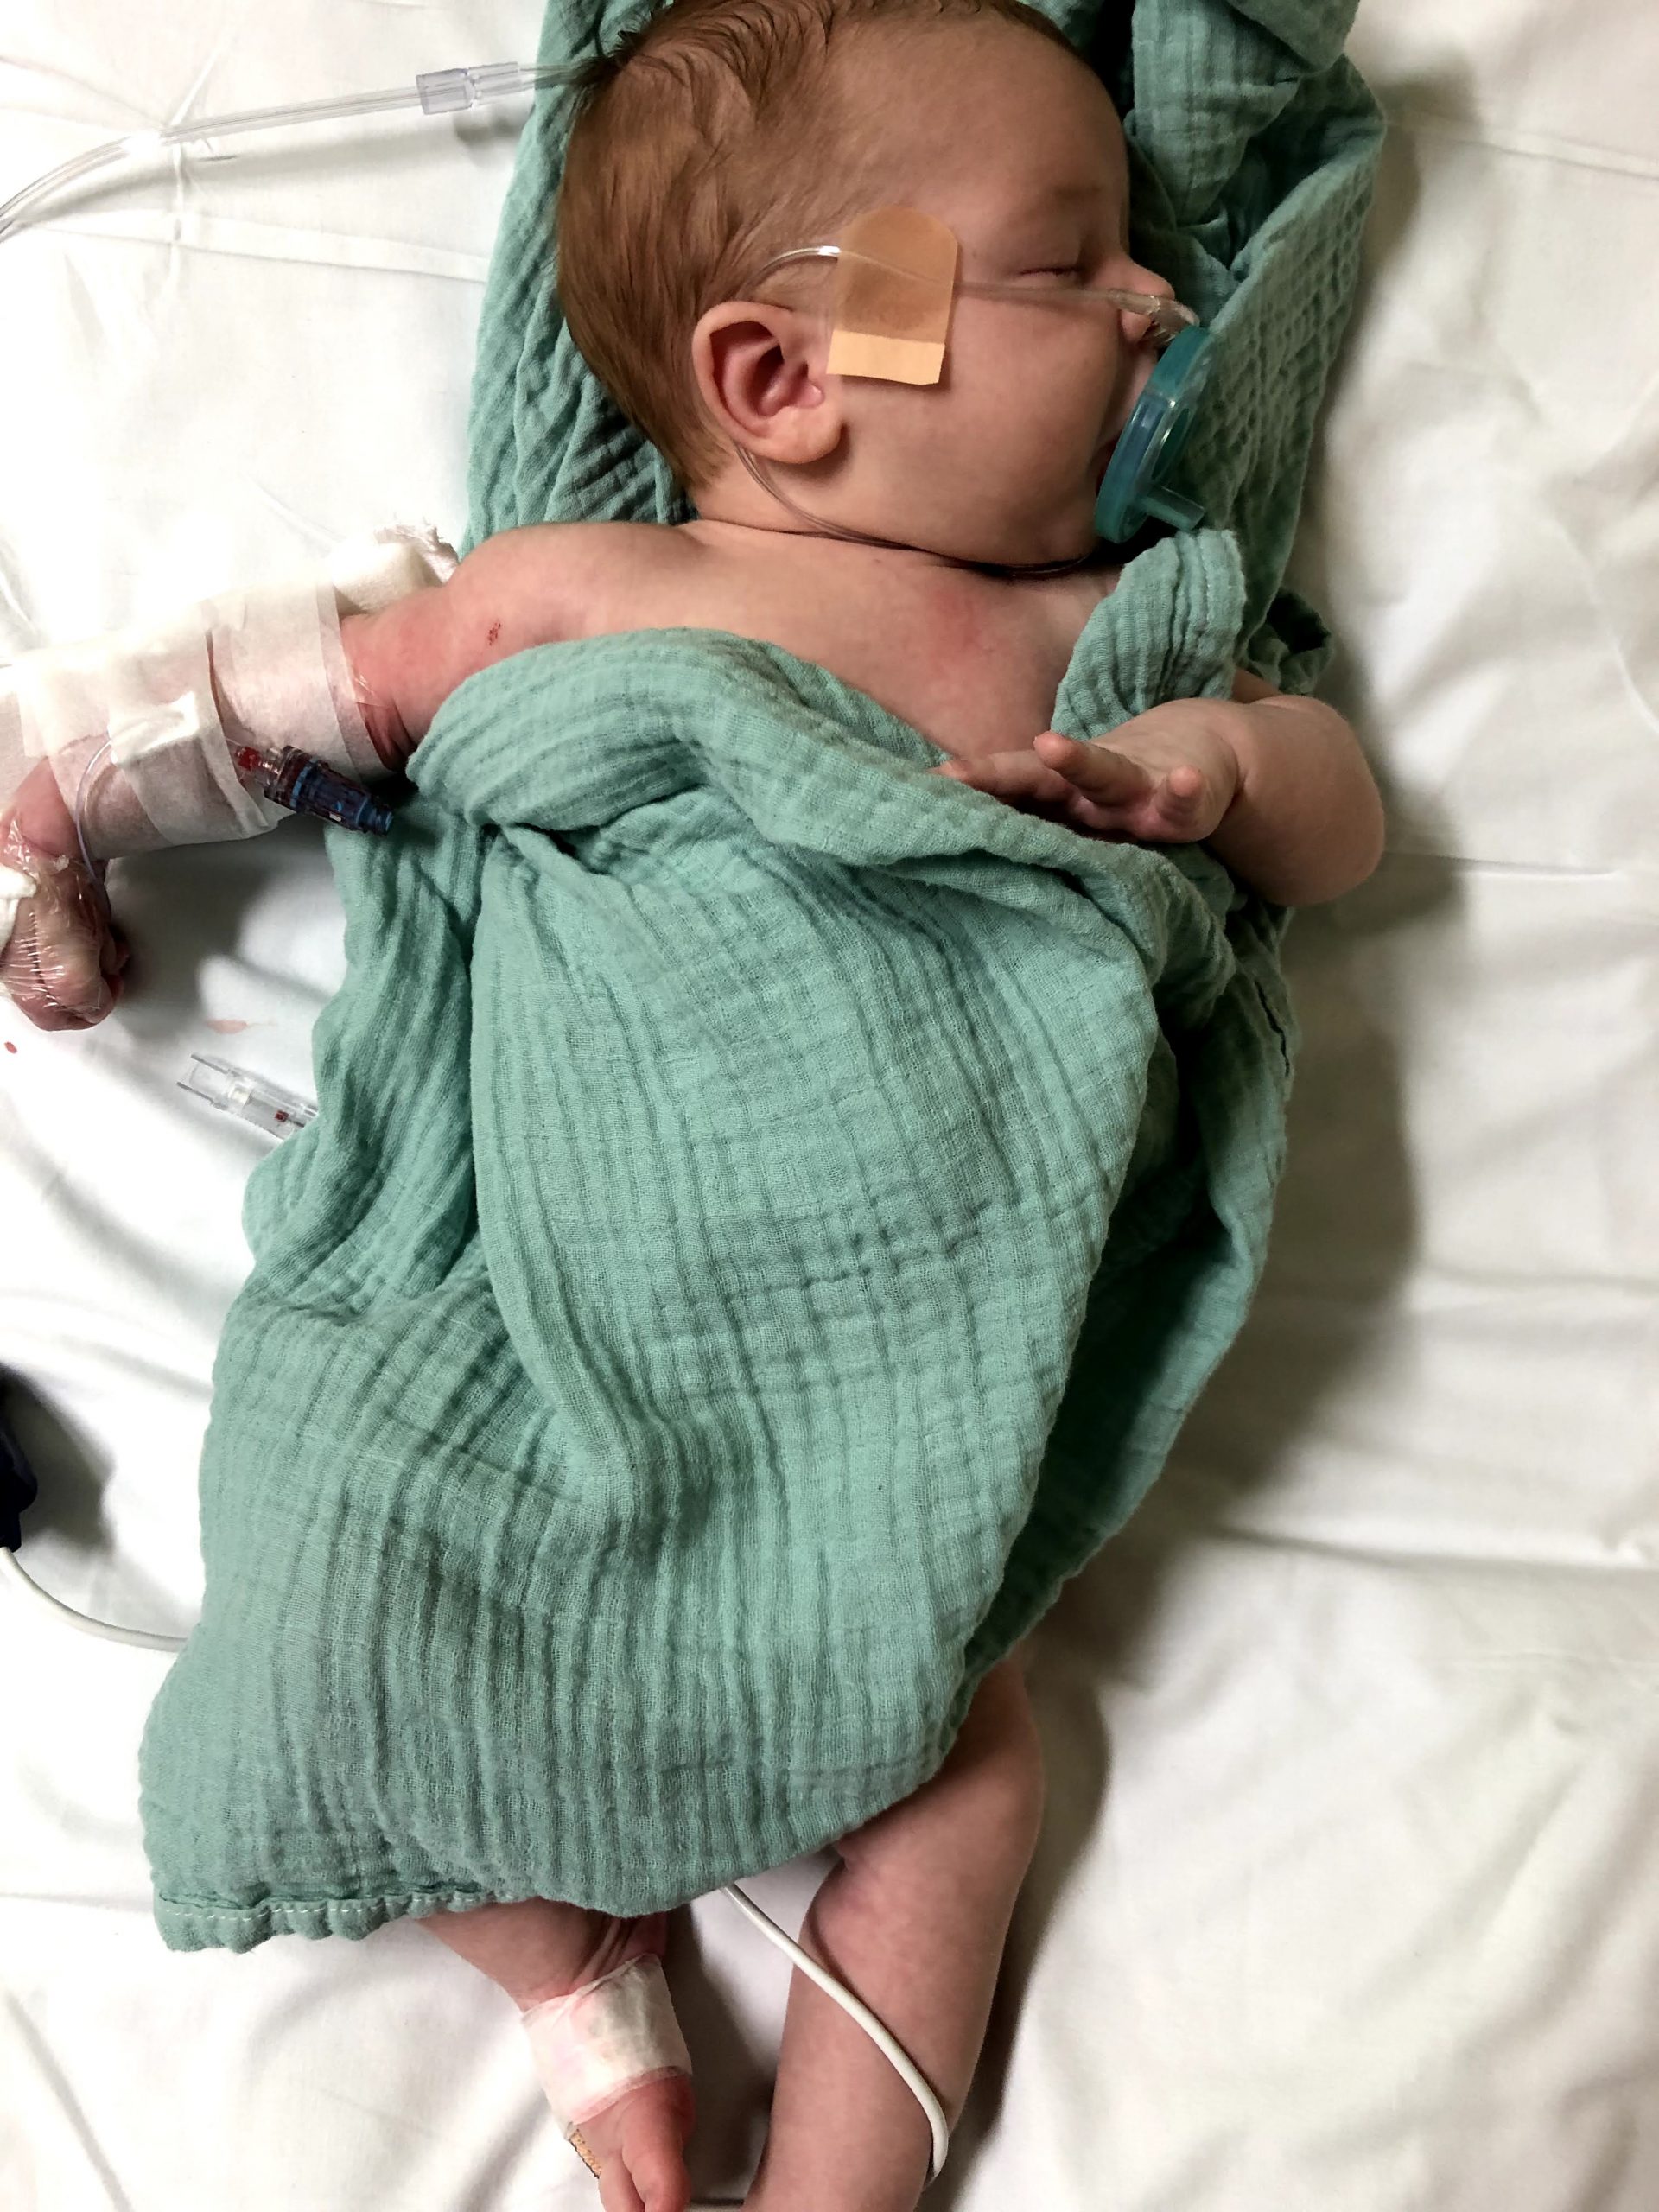 Where to go to the ER in Lafayette Louisiana with a newborn?